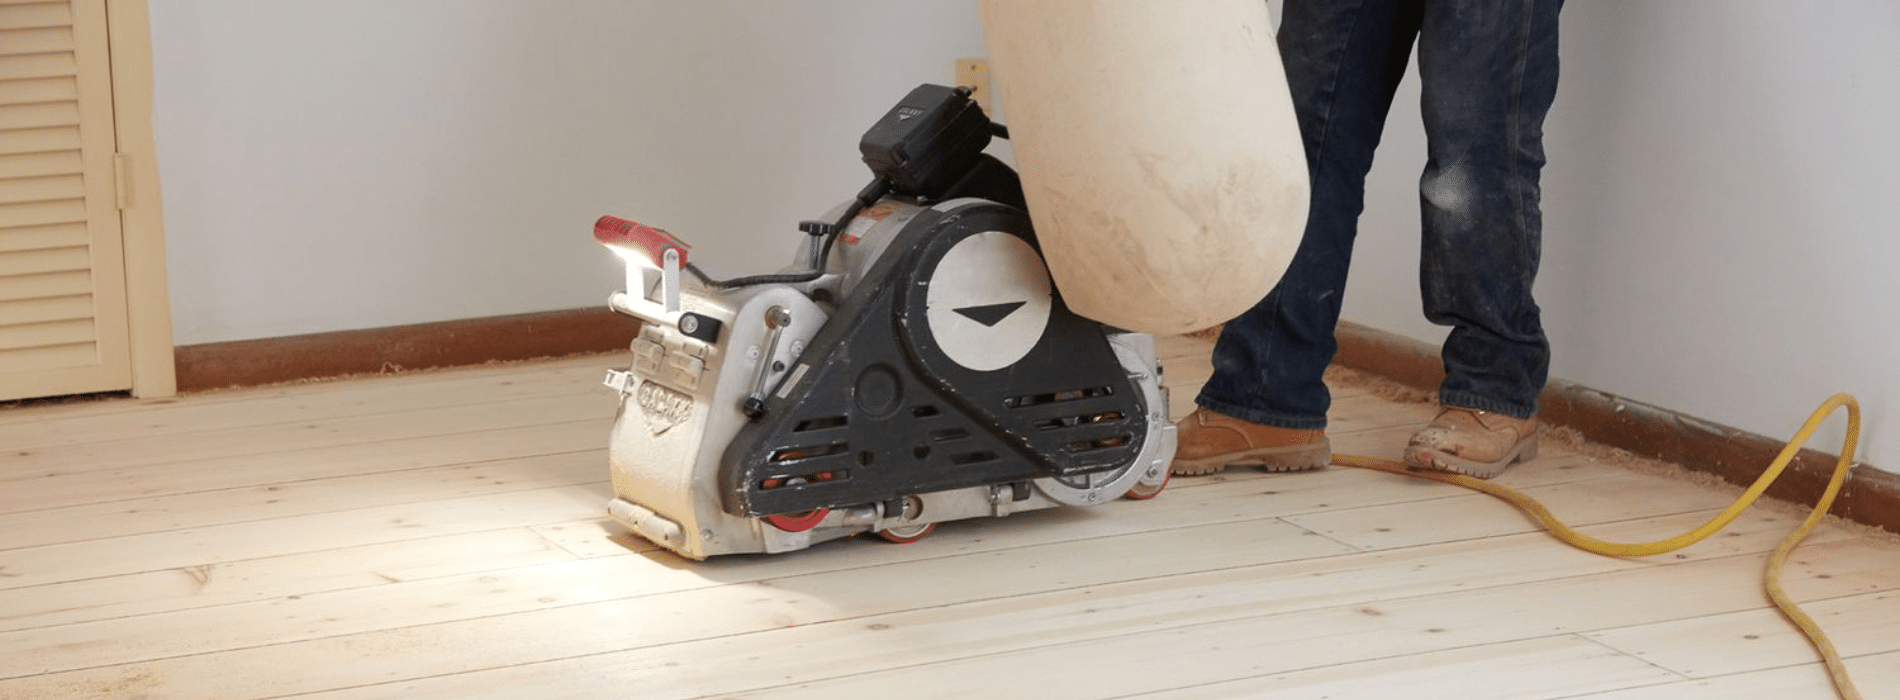 Mr Sander® are using a Bona Scorpion drum sander to sand a parquet floor in Victoria, SW1. This powerful machine, with dimensions of 200 mm and an effect of 1.5 kW, operates at 240 V and 50 Hz. It is connected to a dust extraction system with a HEPA filter for a clean and efficient outcome.